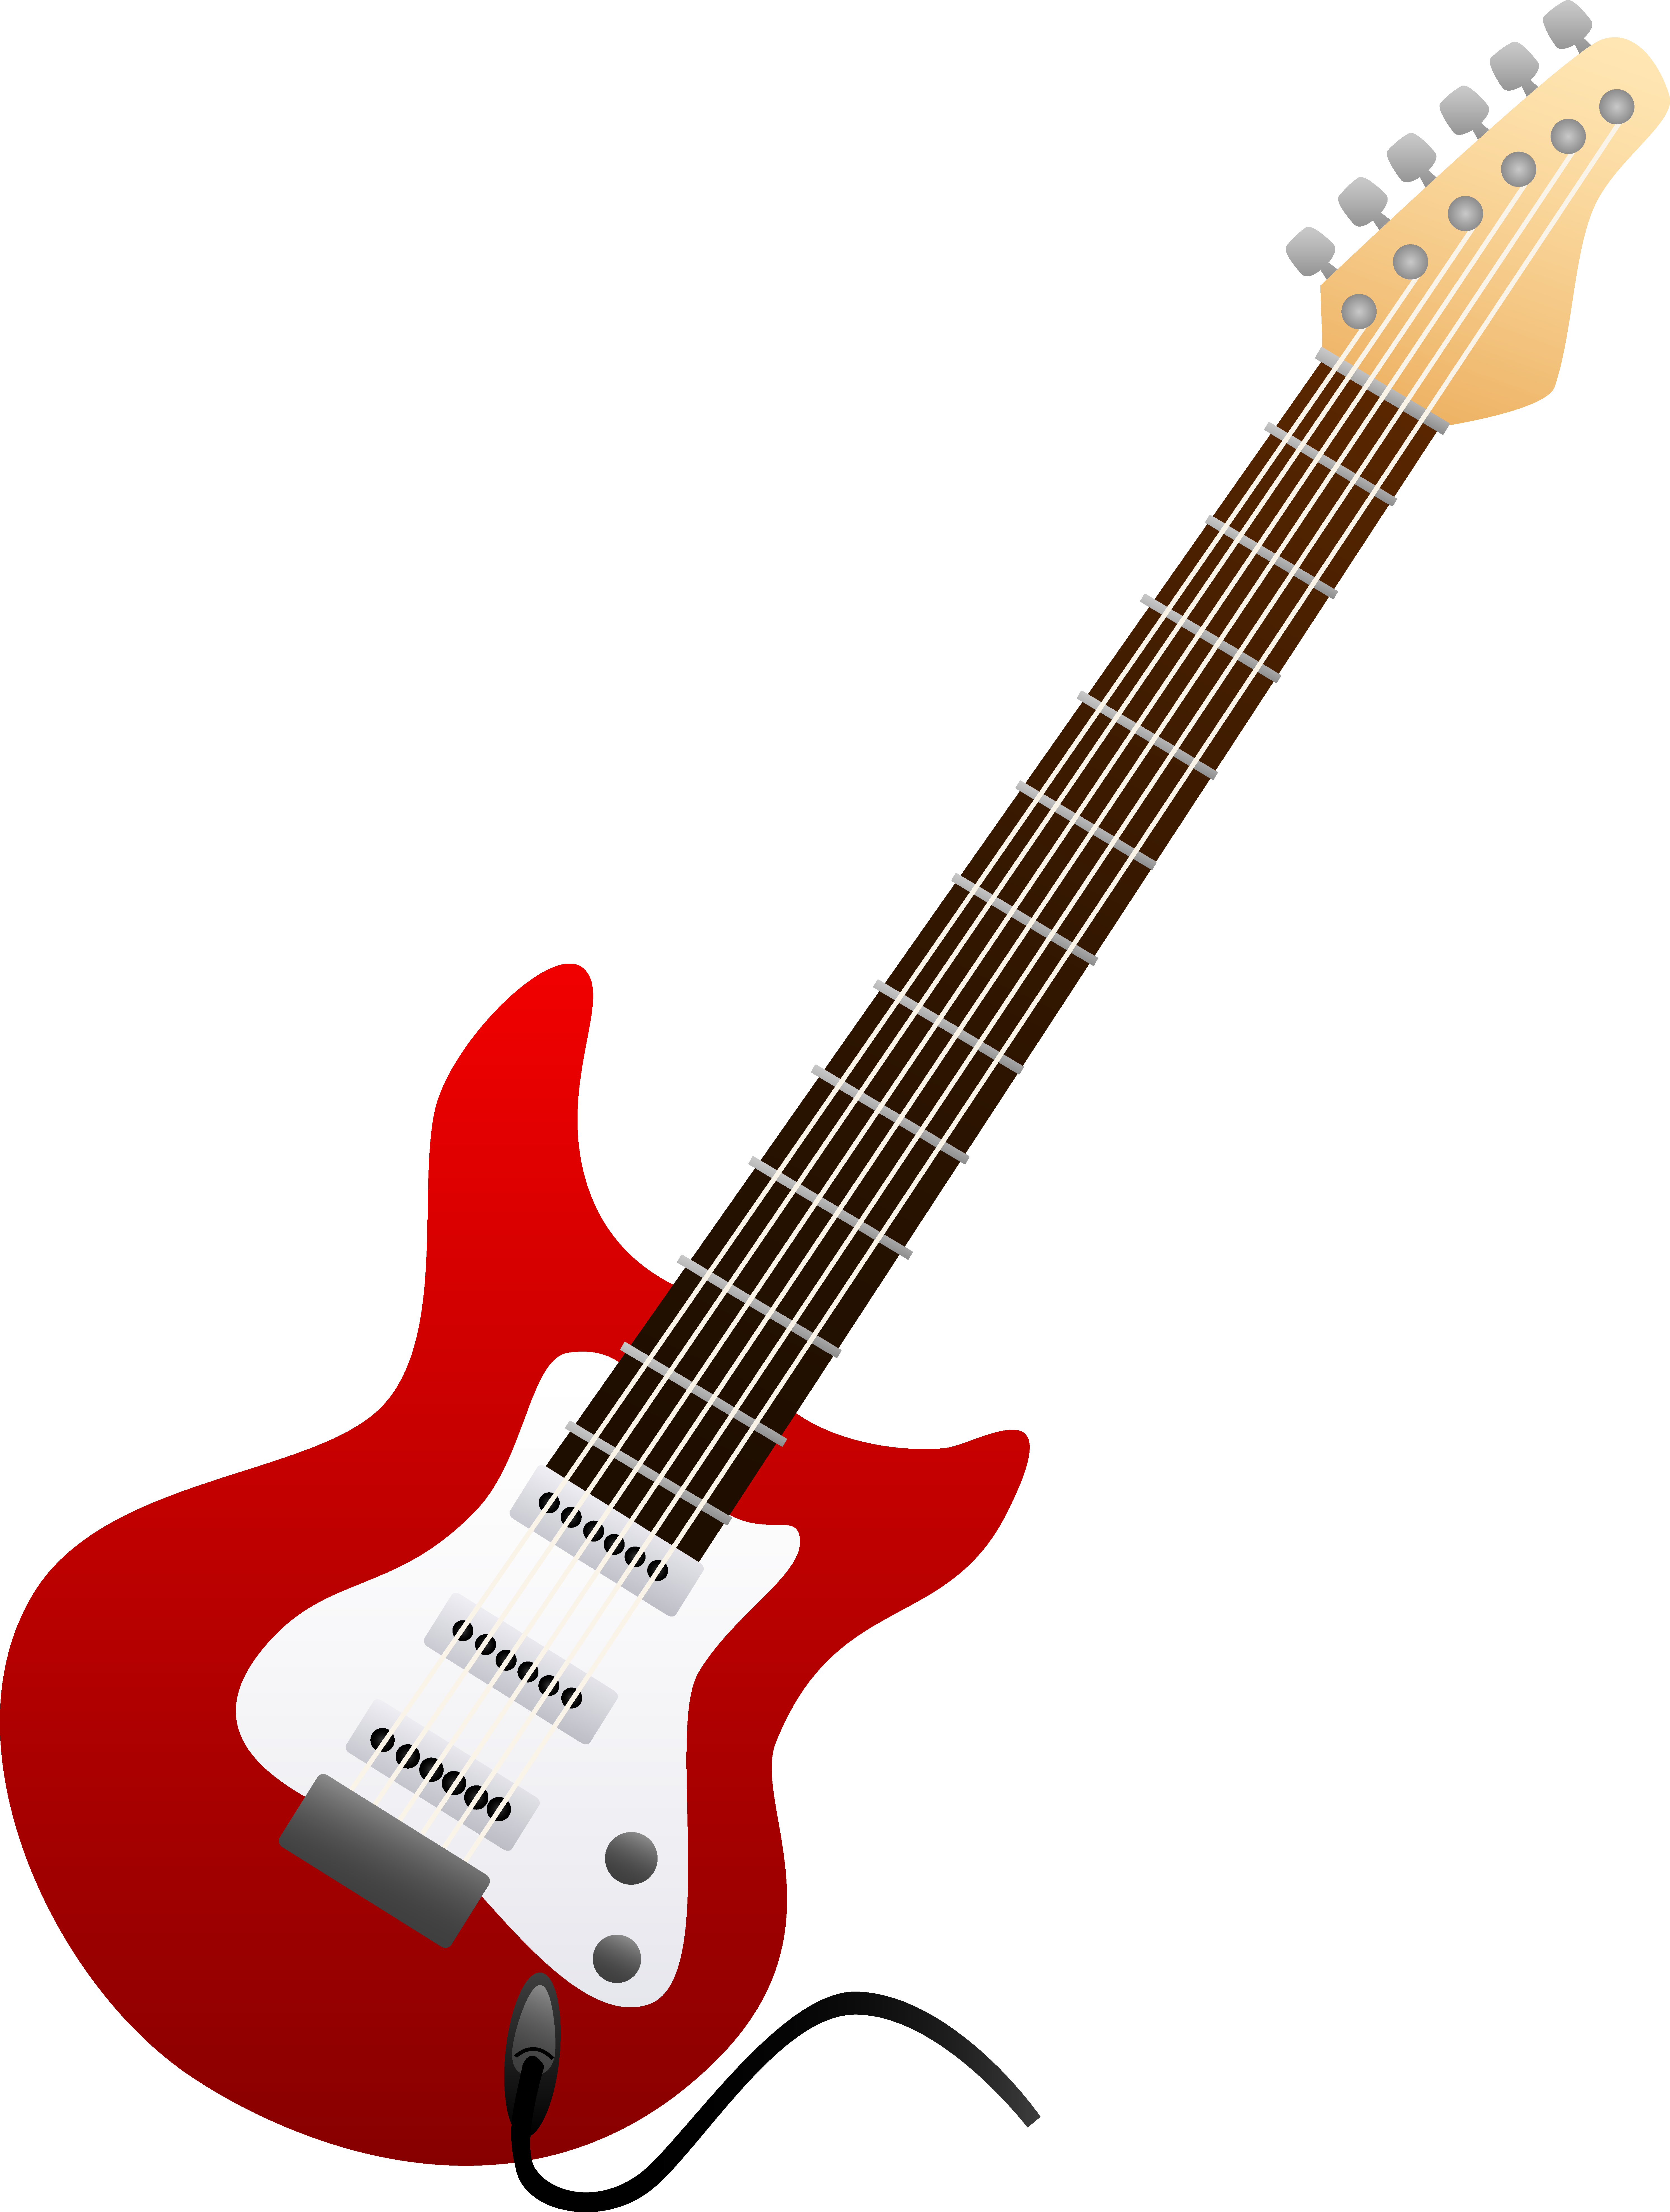 Pink Guitar Clipart | Clipart Panda - Free Clipart Images